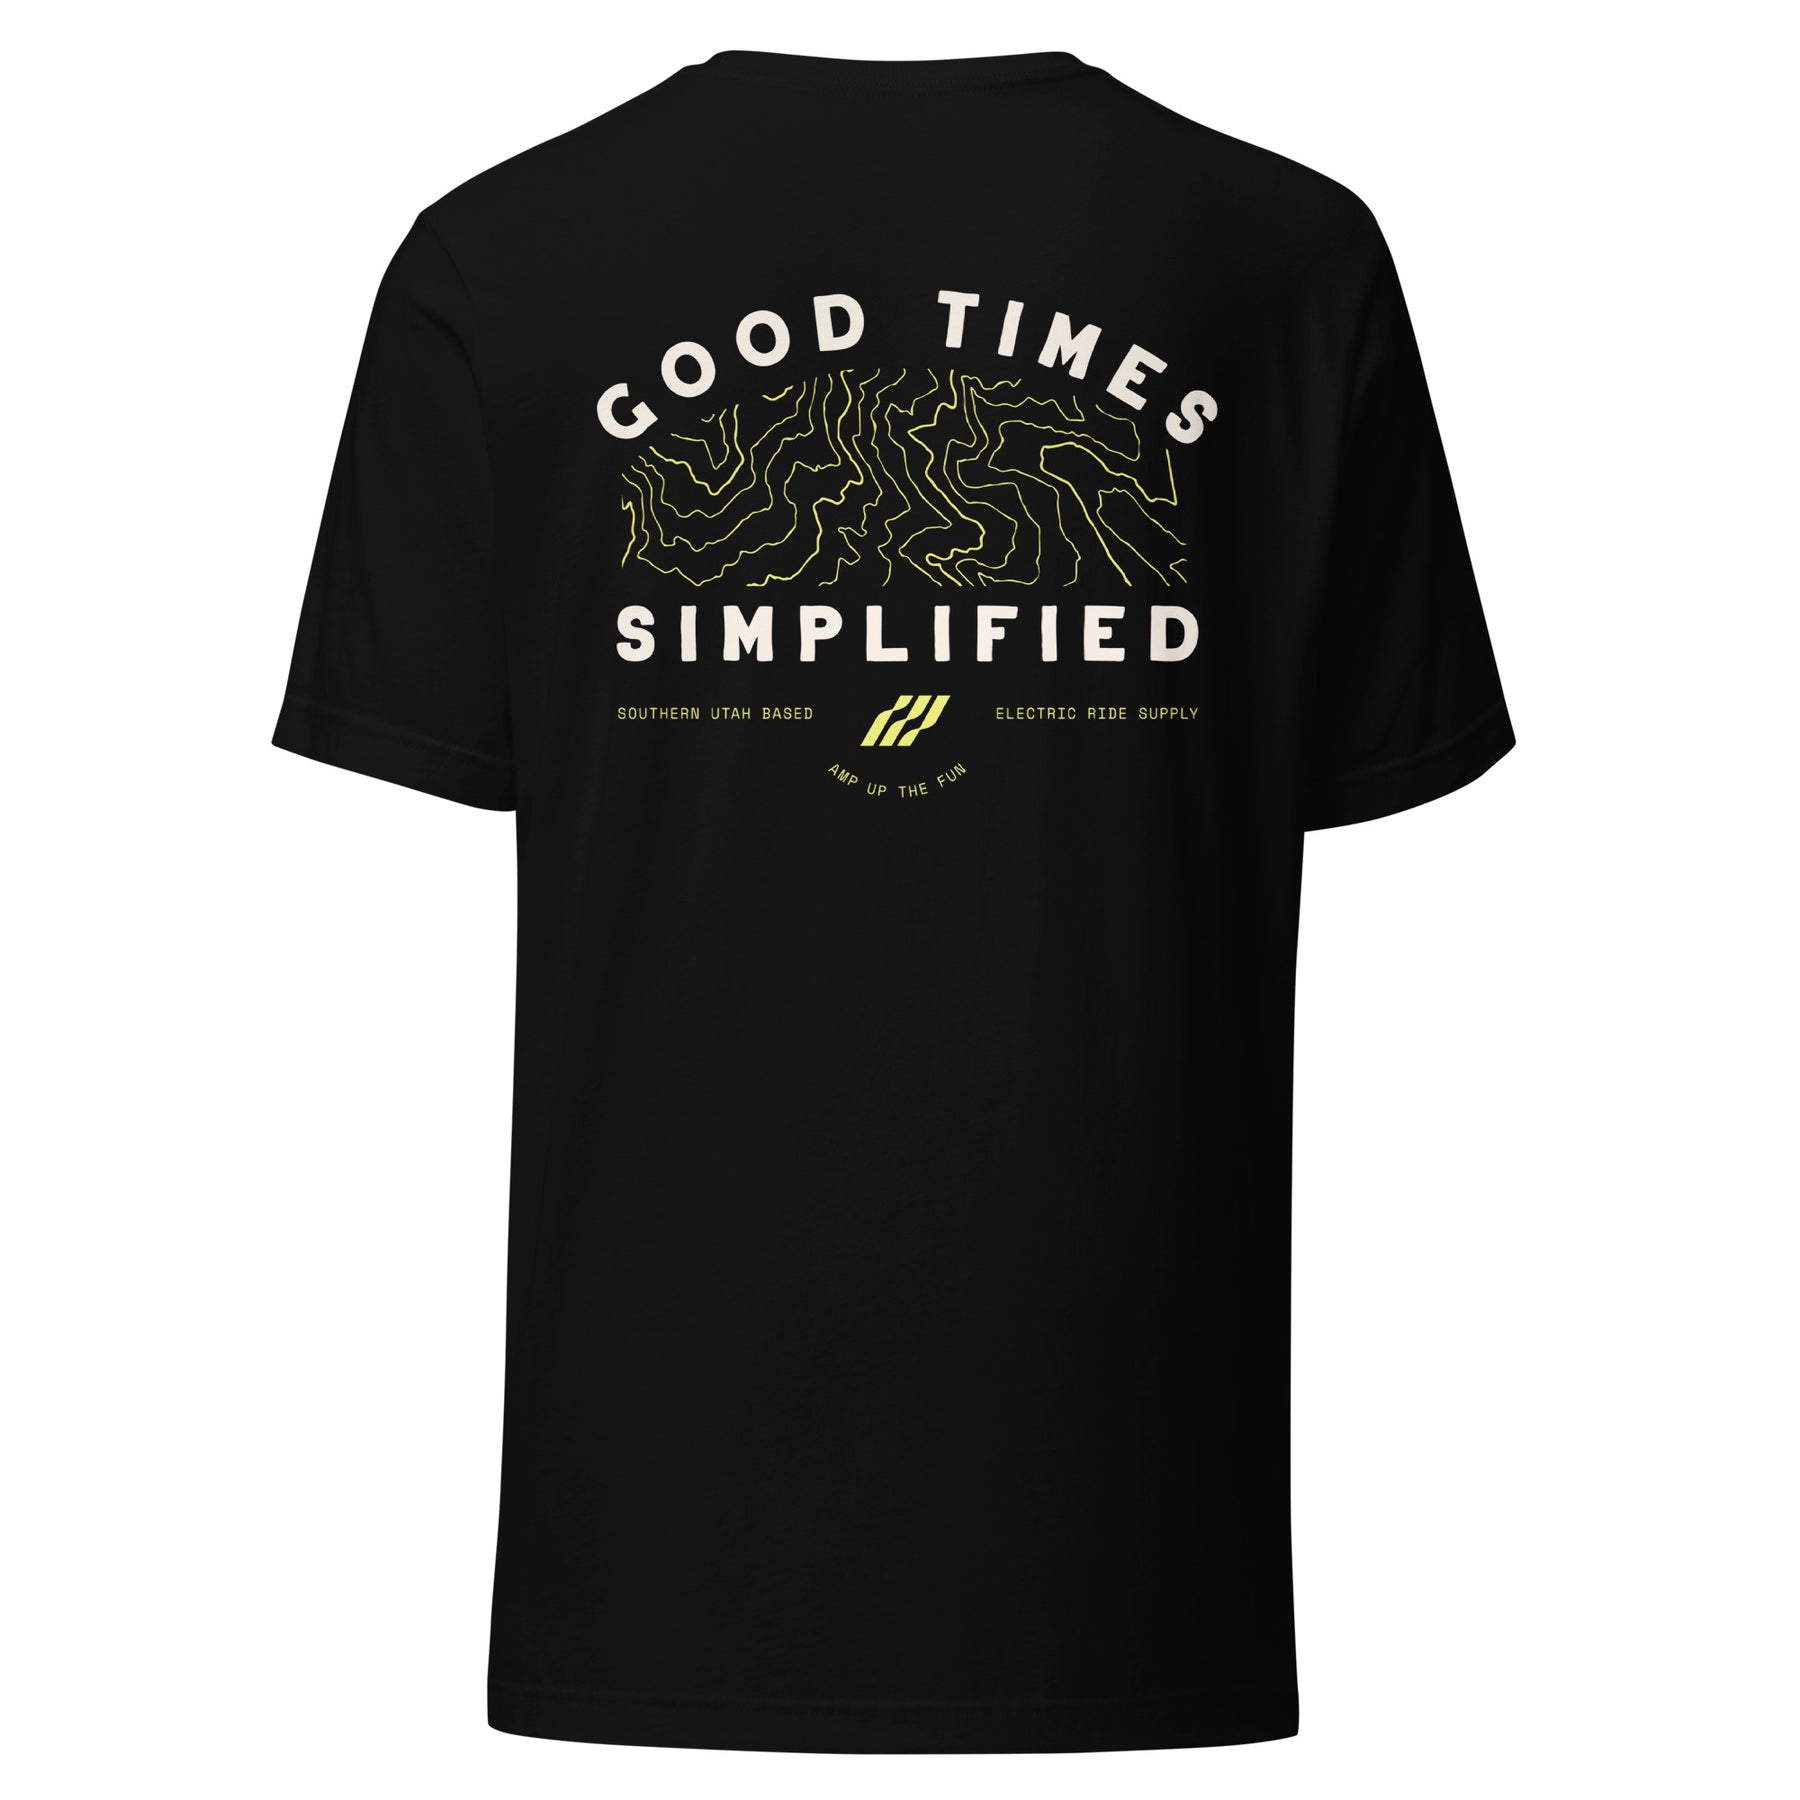 The Good Times Simplified Tee 2